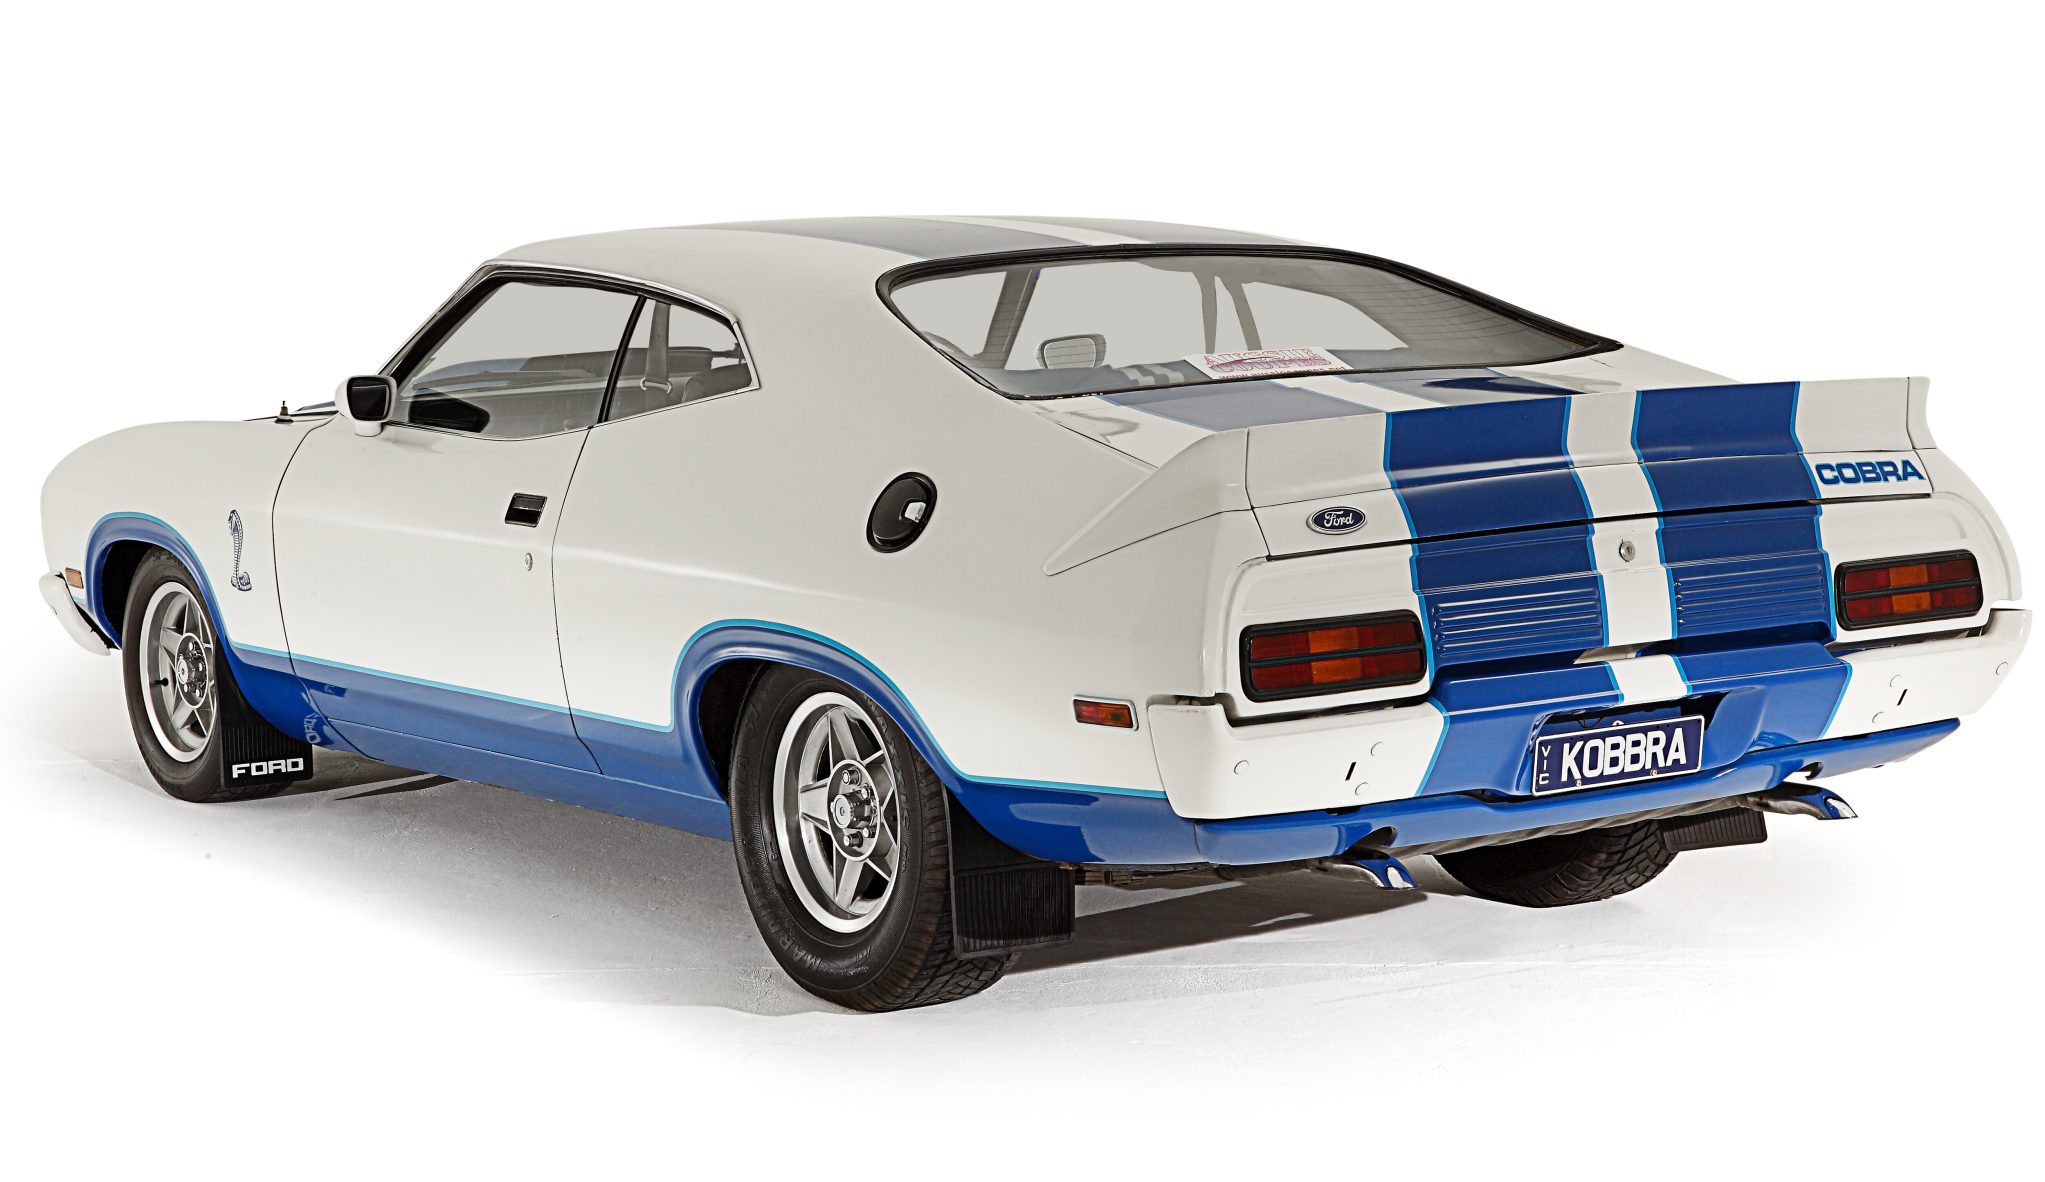 Street Machine Features Ford Falcon Xc Cobra Rear Angle